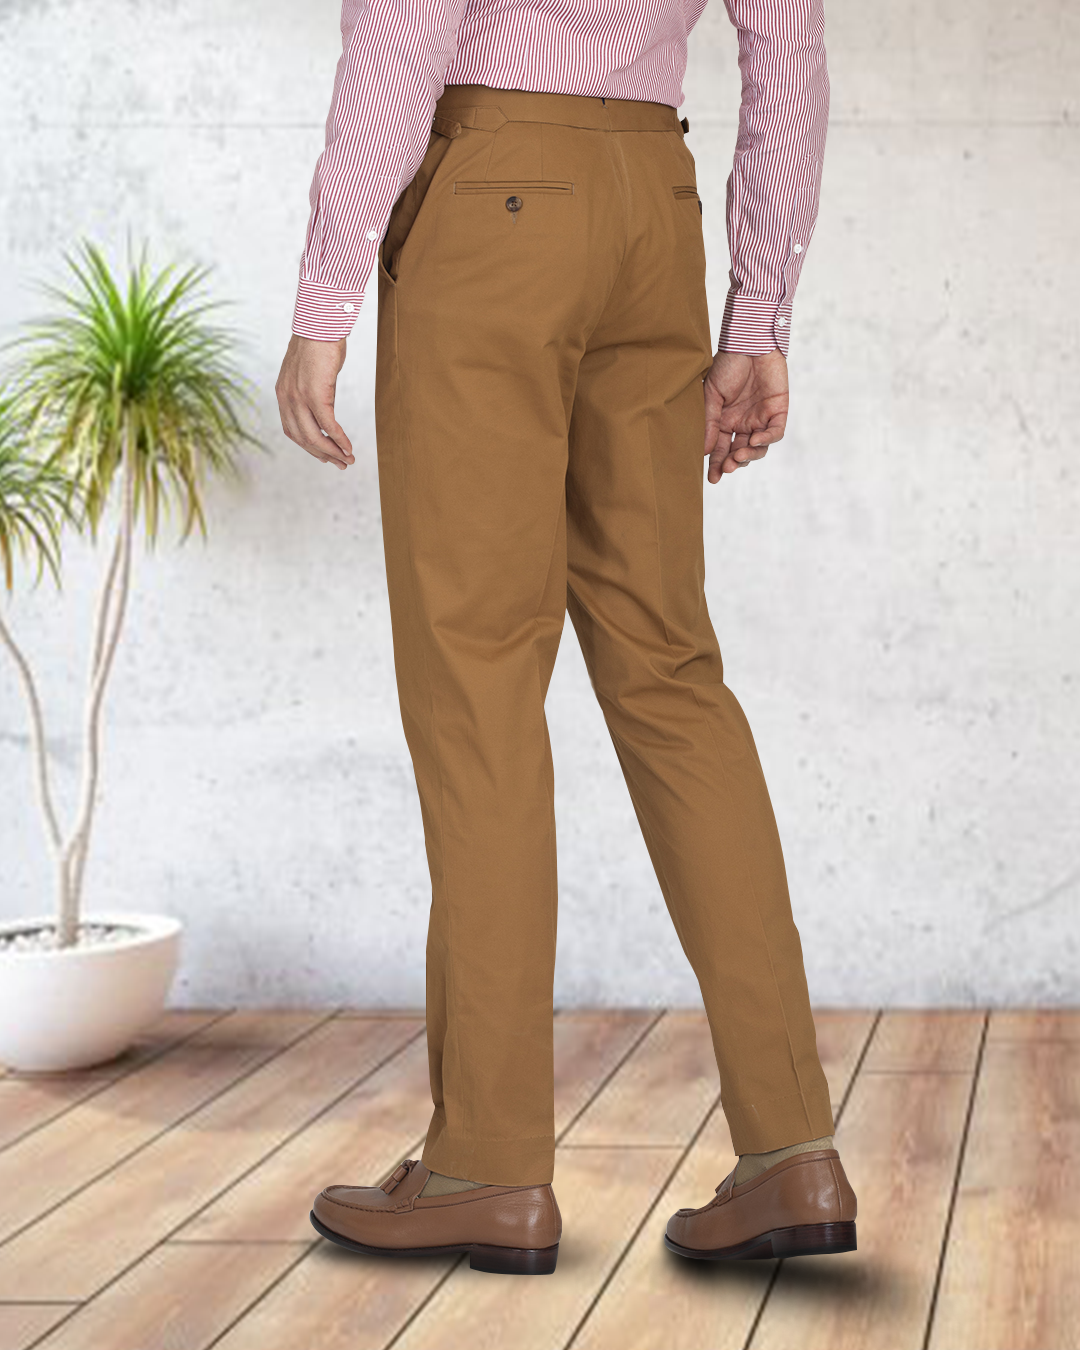 Back view of model wearing custom Genoa Chino pants for men by Luxire in copper wearing brown shoes